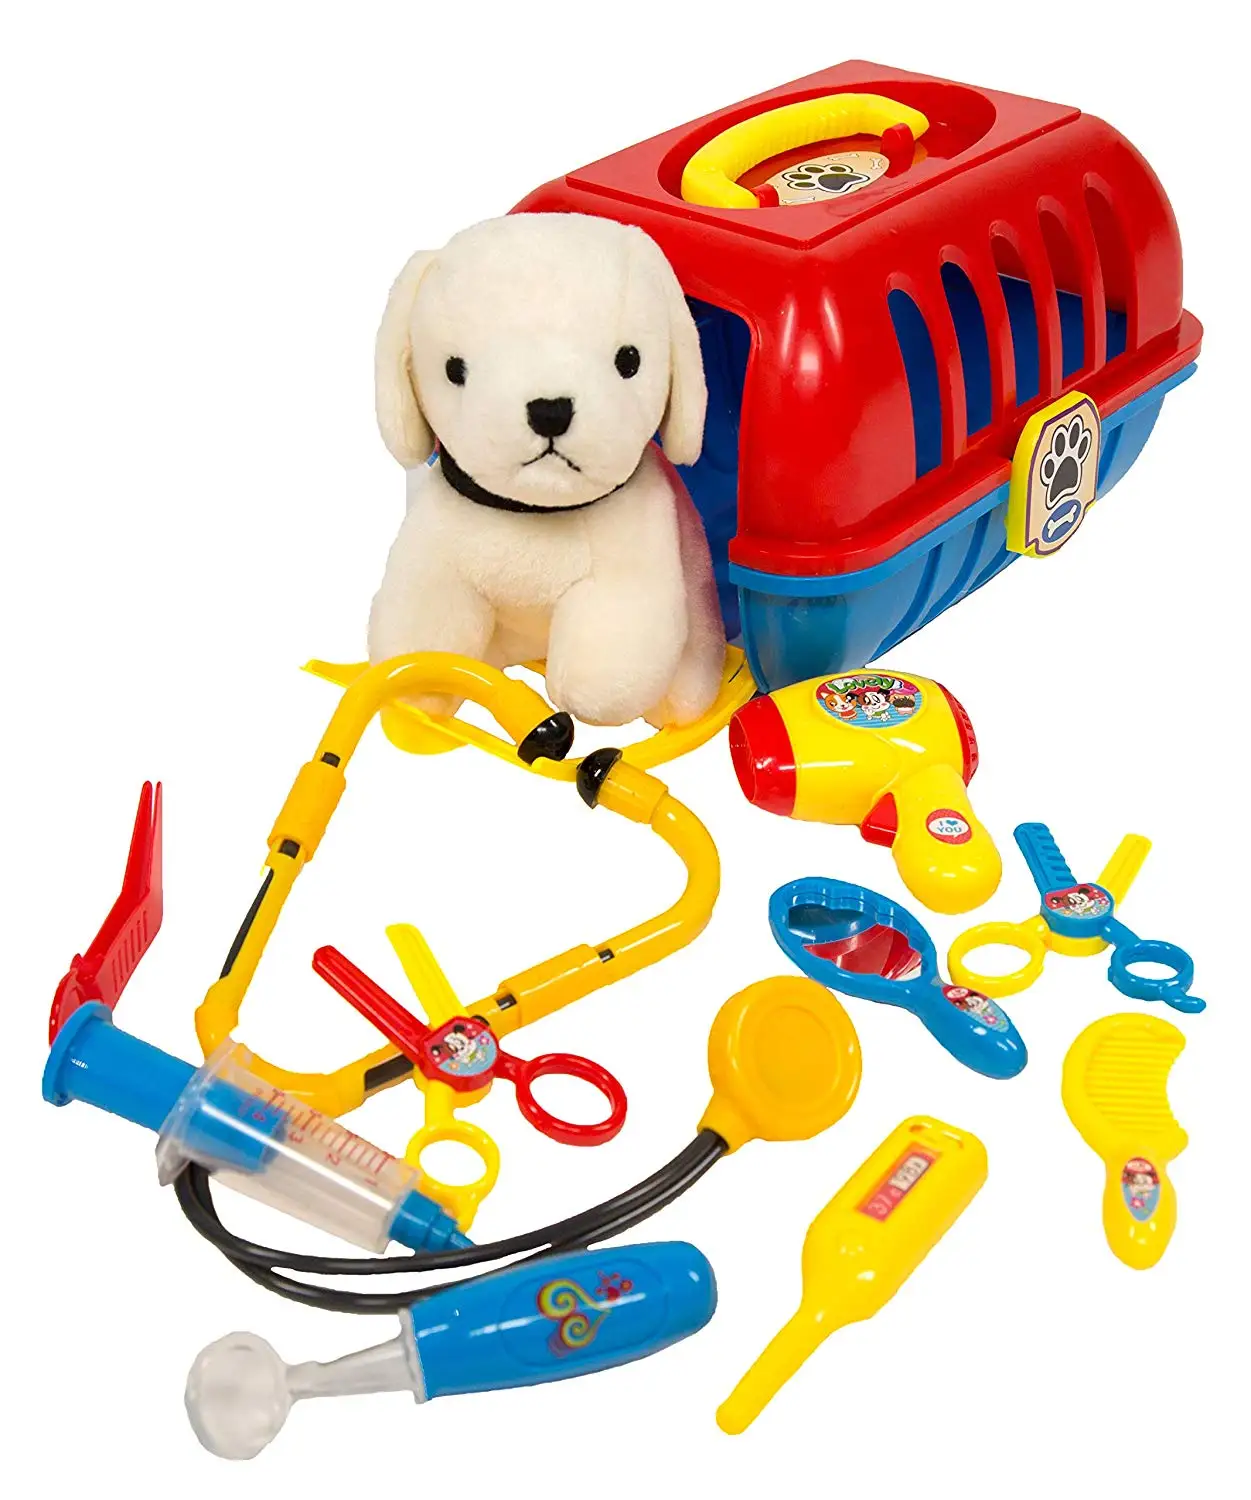 stand up veterinary playsets